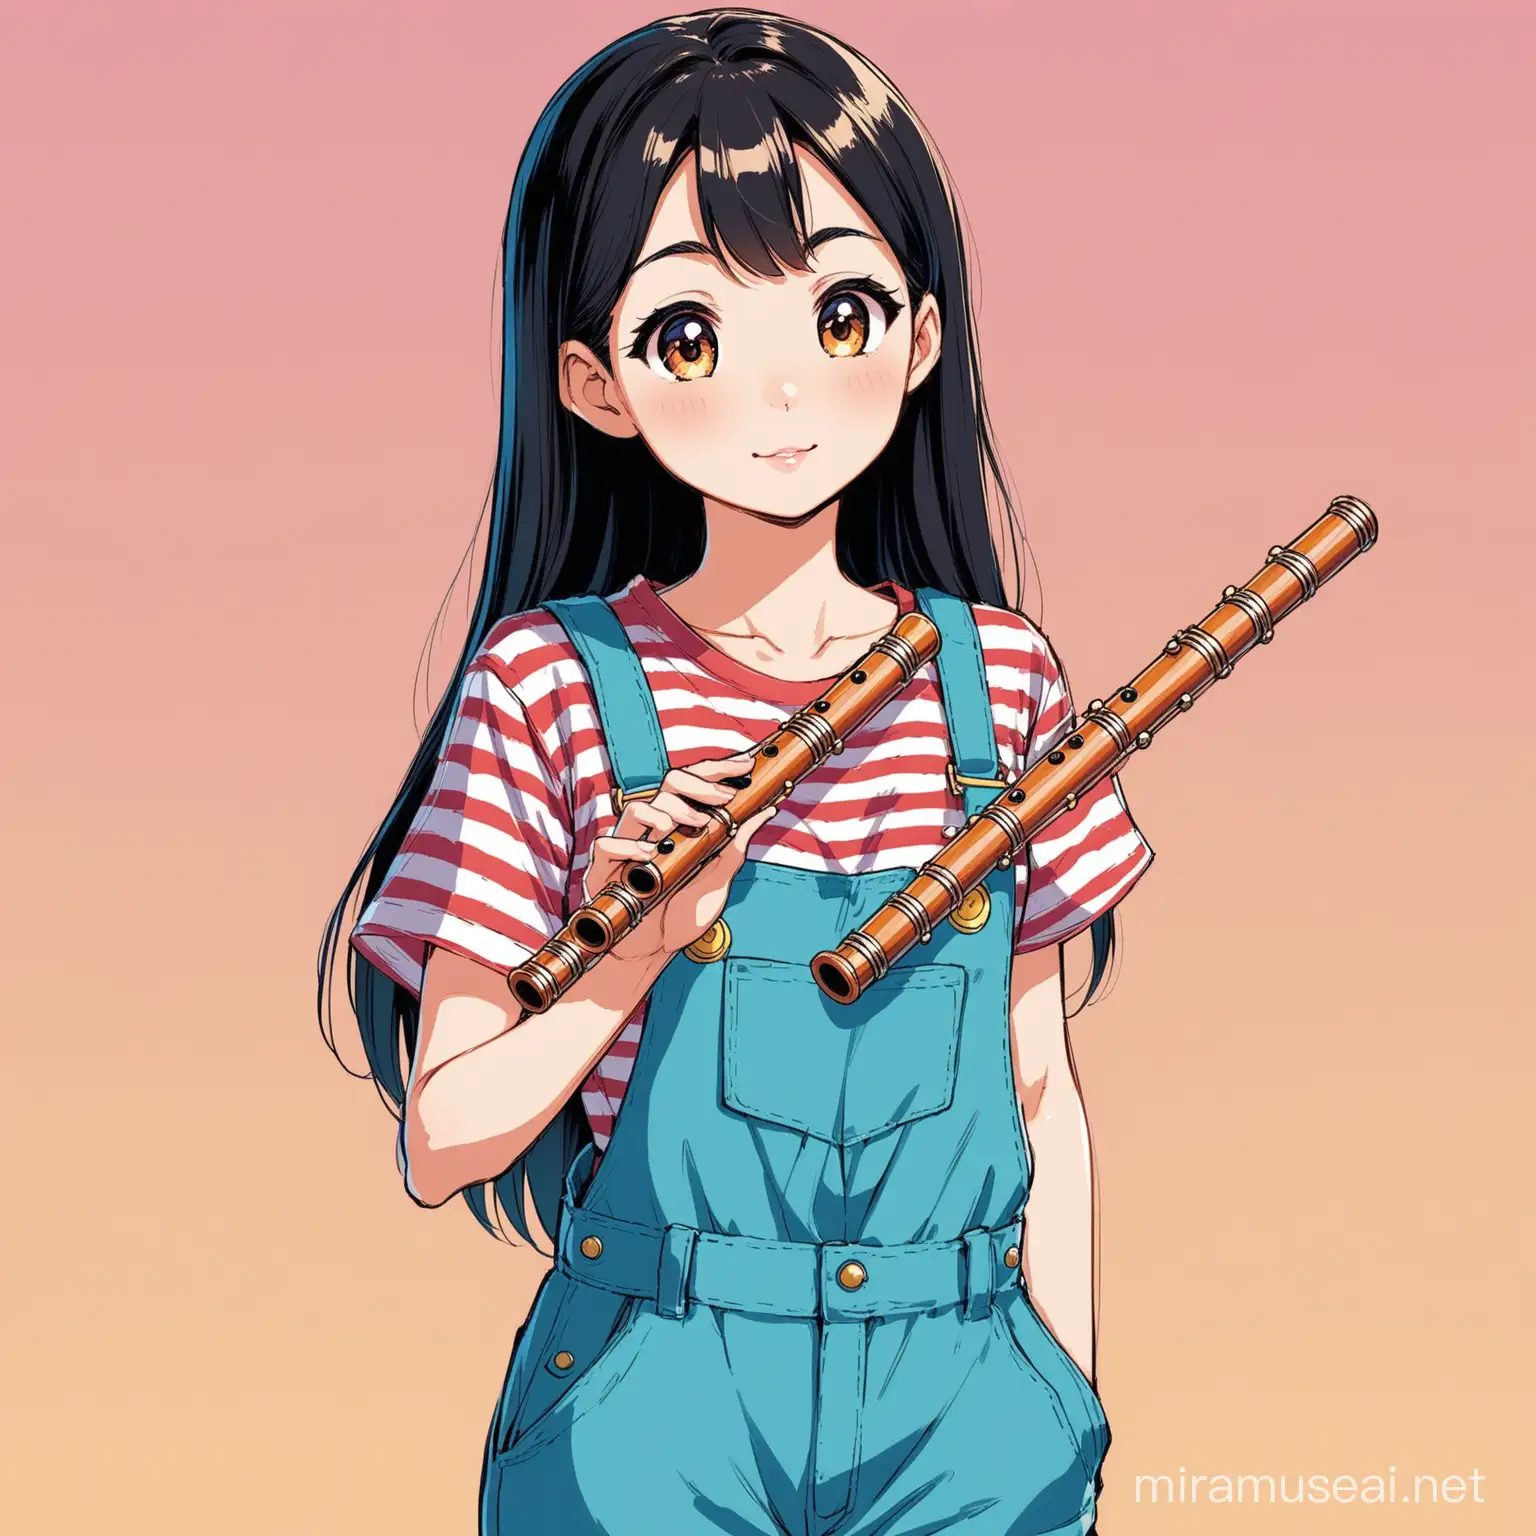 Disney Style Japanese Teenager Playing Dizi Flute in Overalls and Striped Shirt